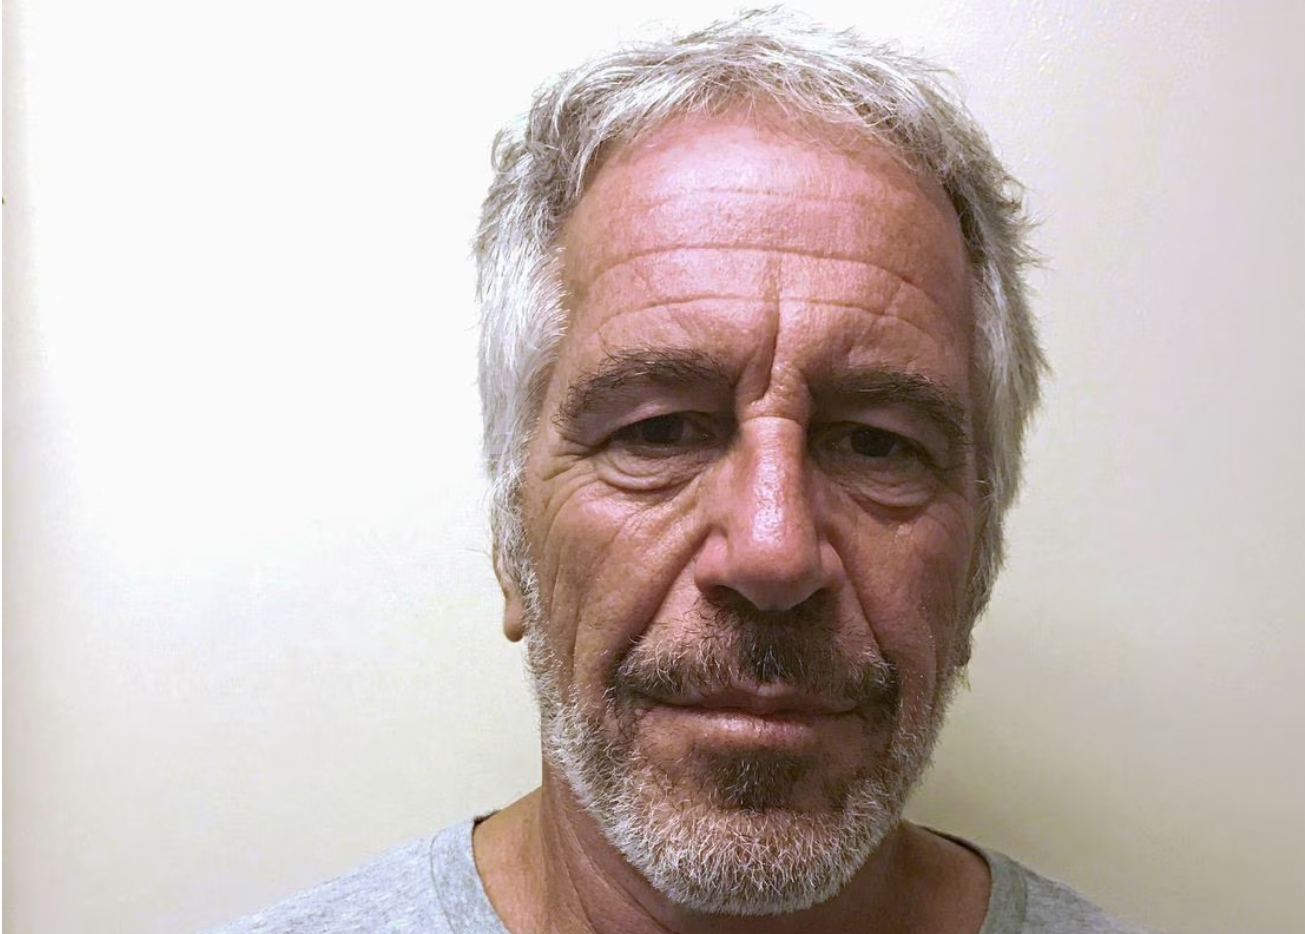 Bureau of Prisons staff faulted for serious failures in lead-up to Jeffrey Epstein suicide